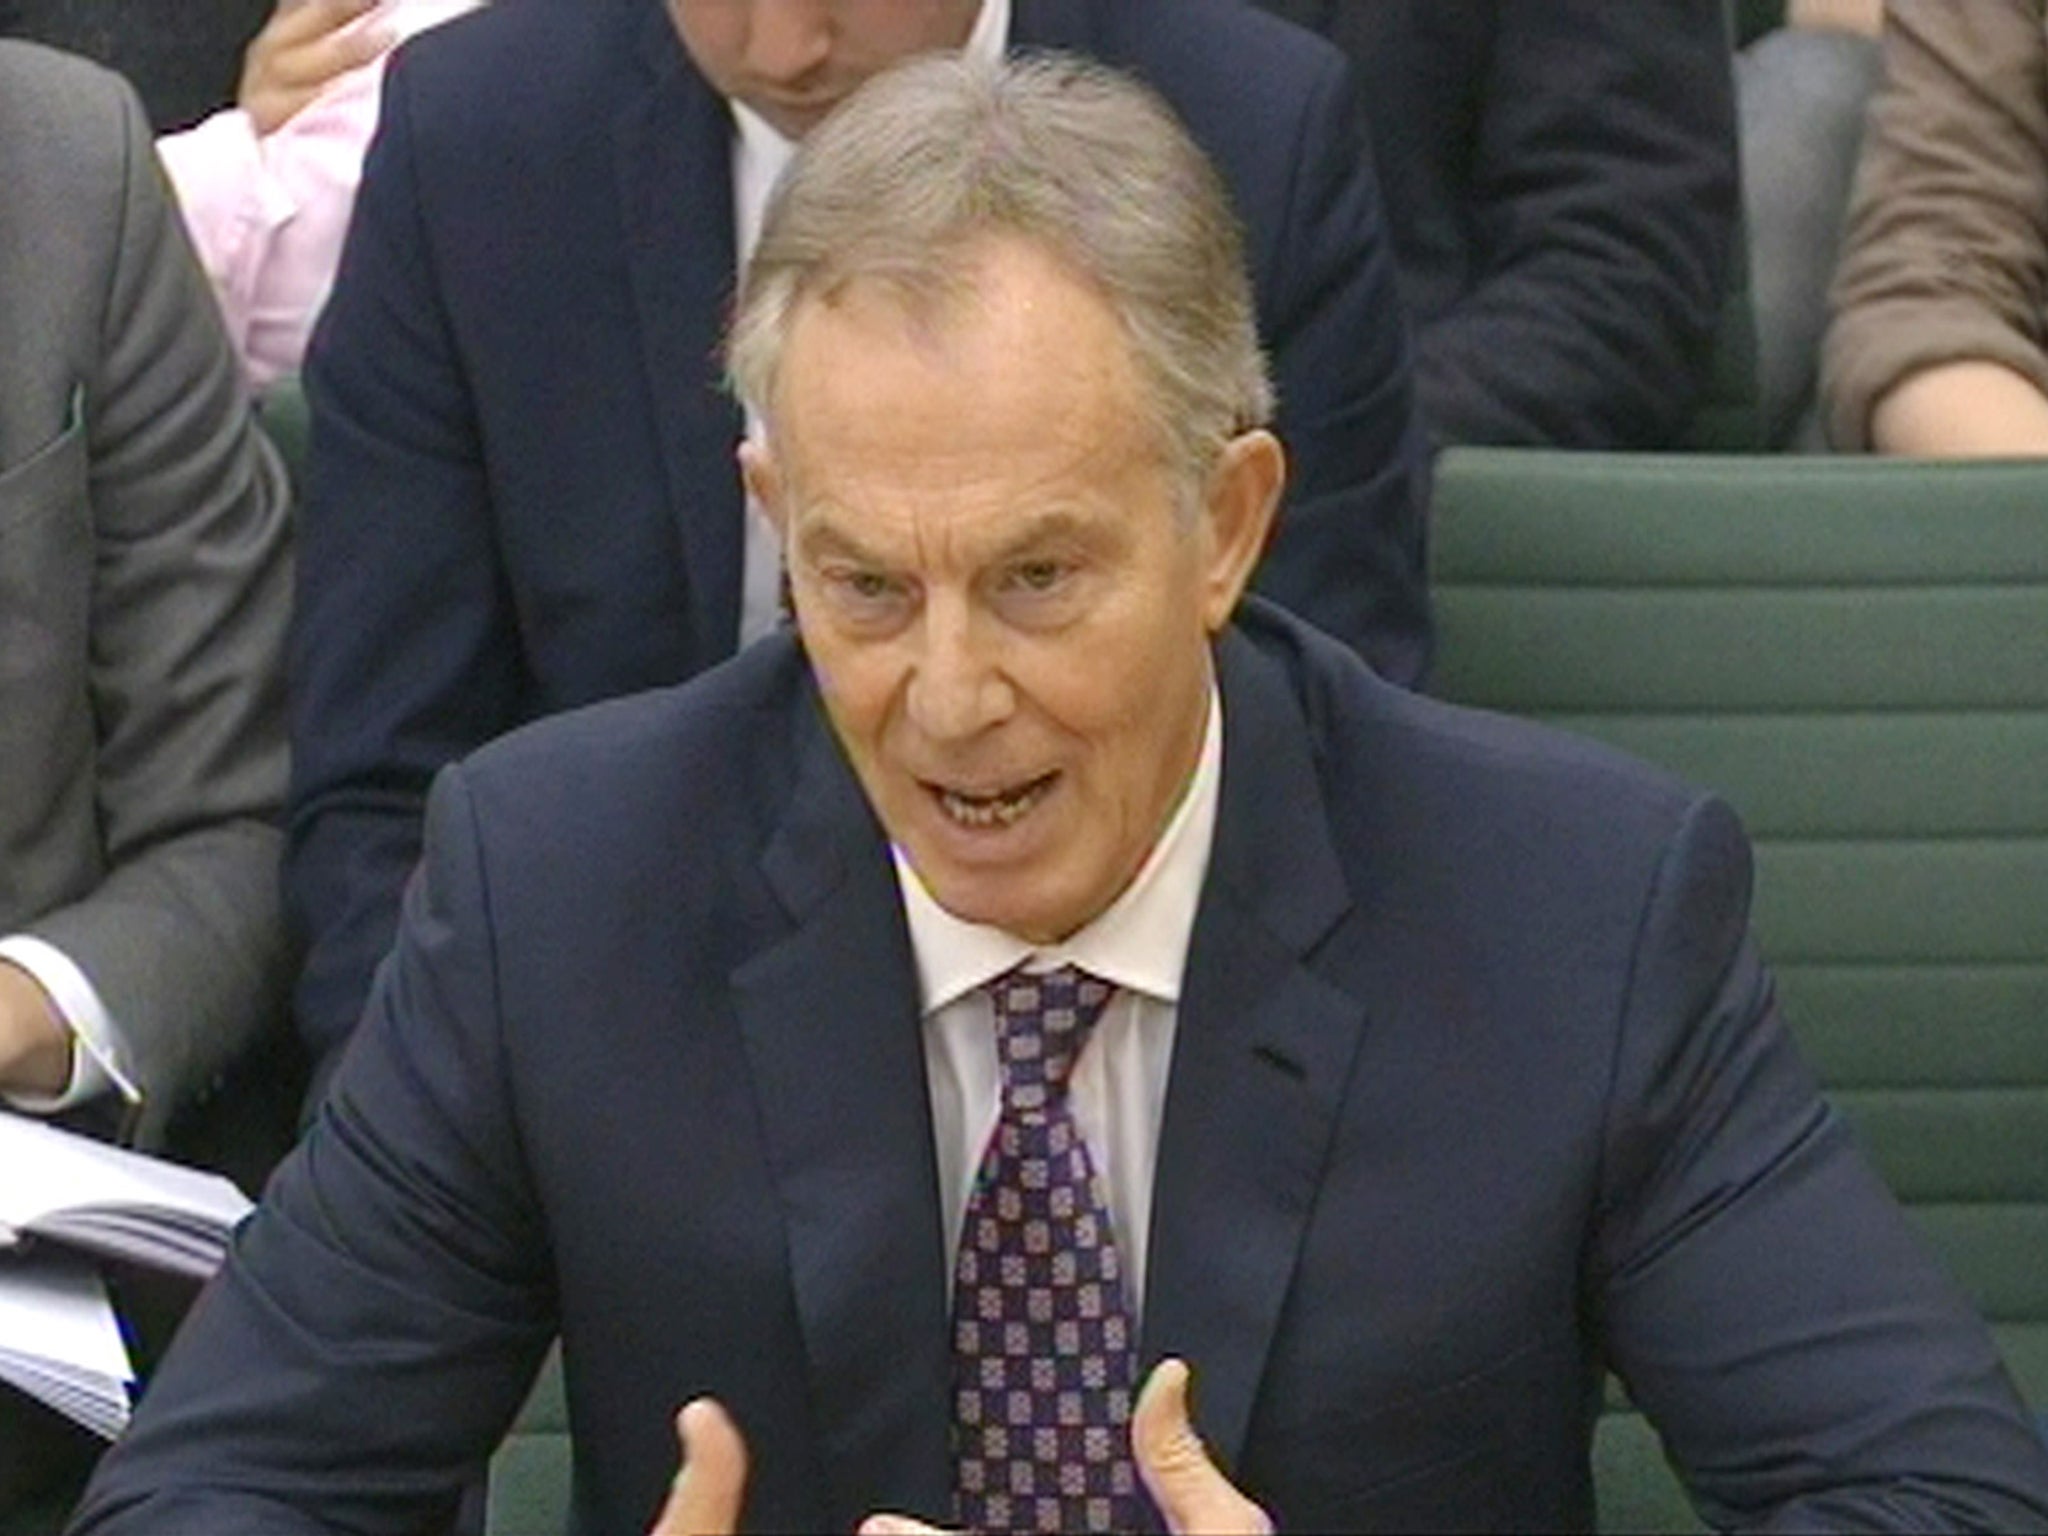 Former Prime Minister Tony Blair appearing in front of the Foreign Affairs Select Committee at the House of Commons where he is giving evidence on UK's foreign policy towards Libya.